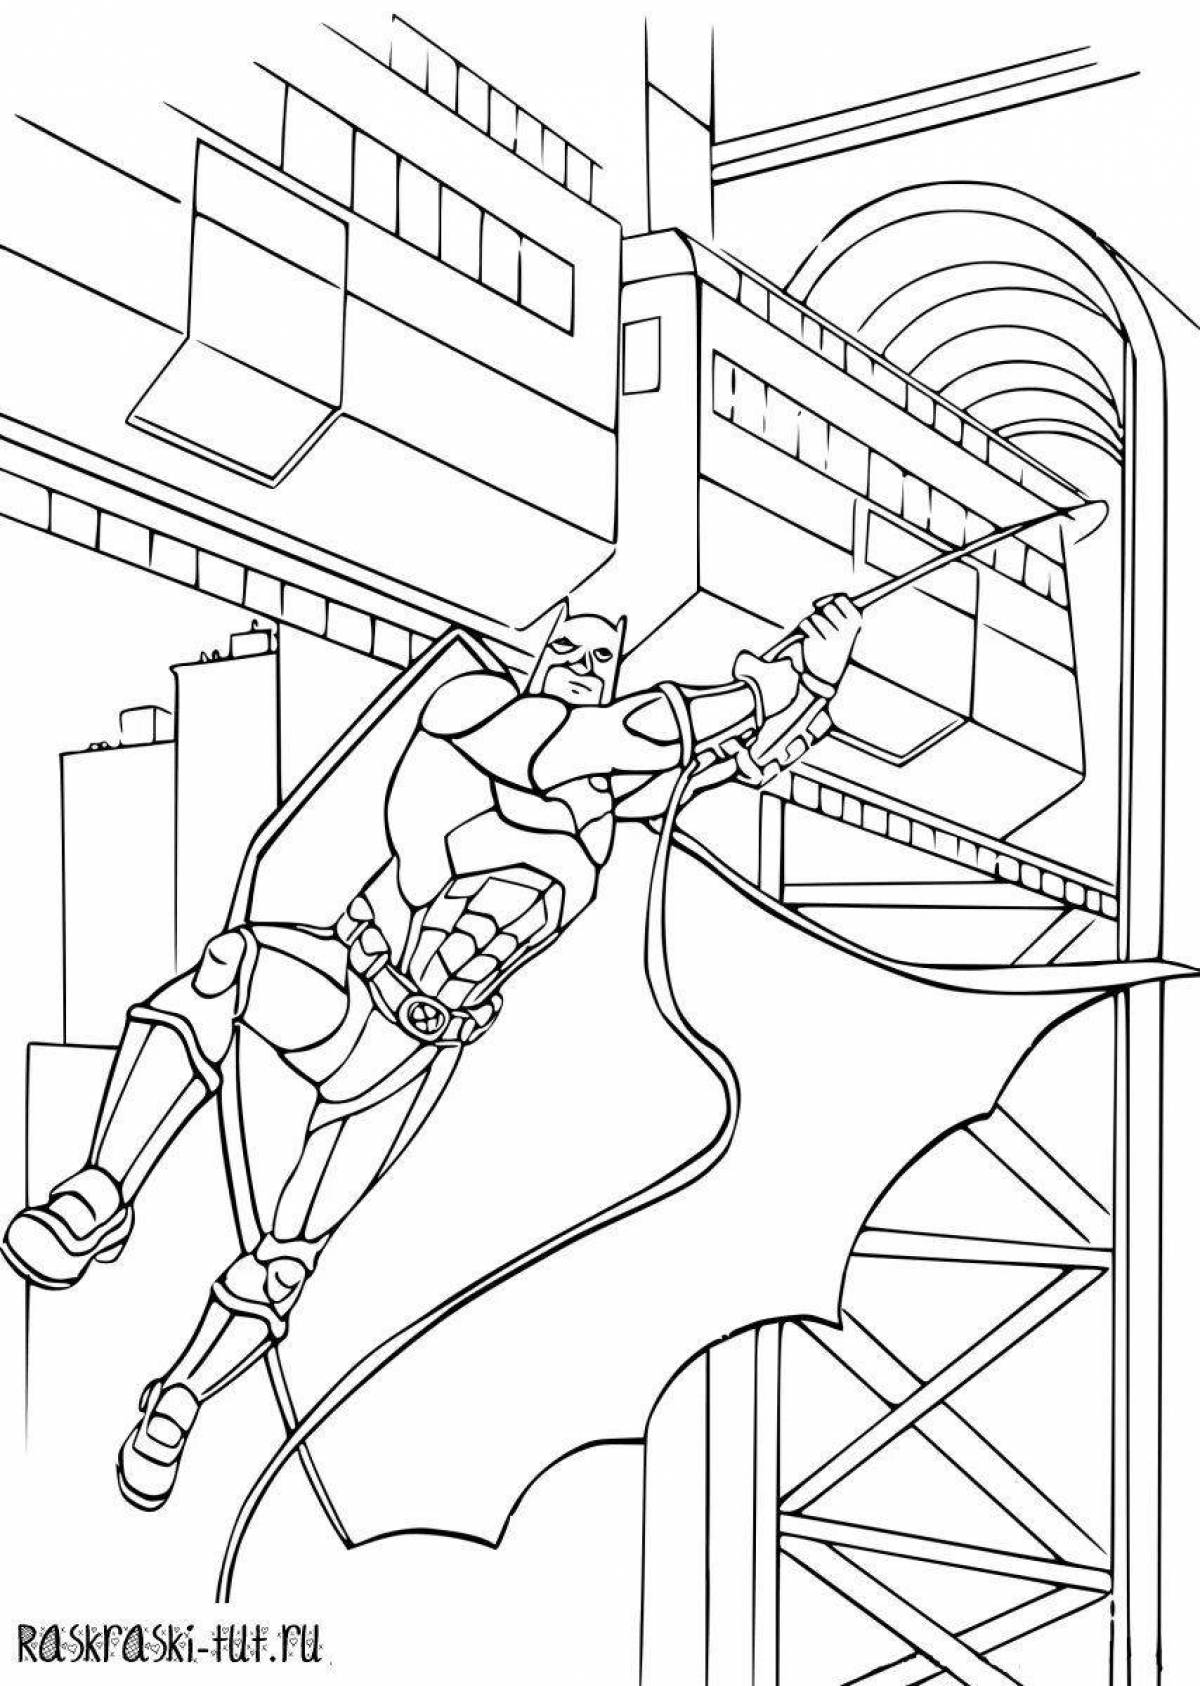 Coloring page amazing batman and spiderman